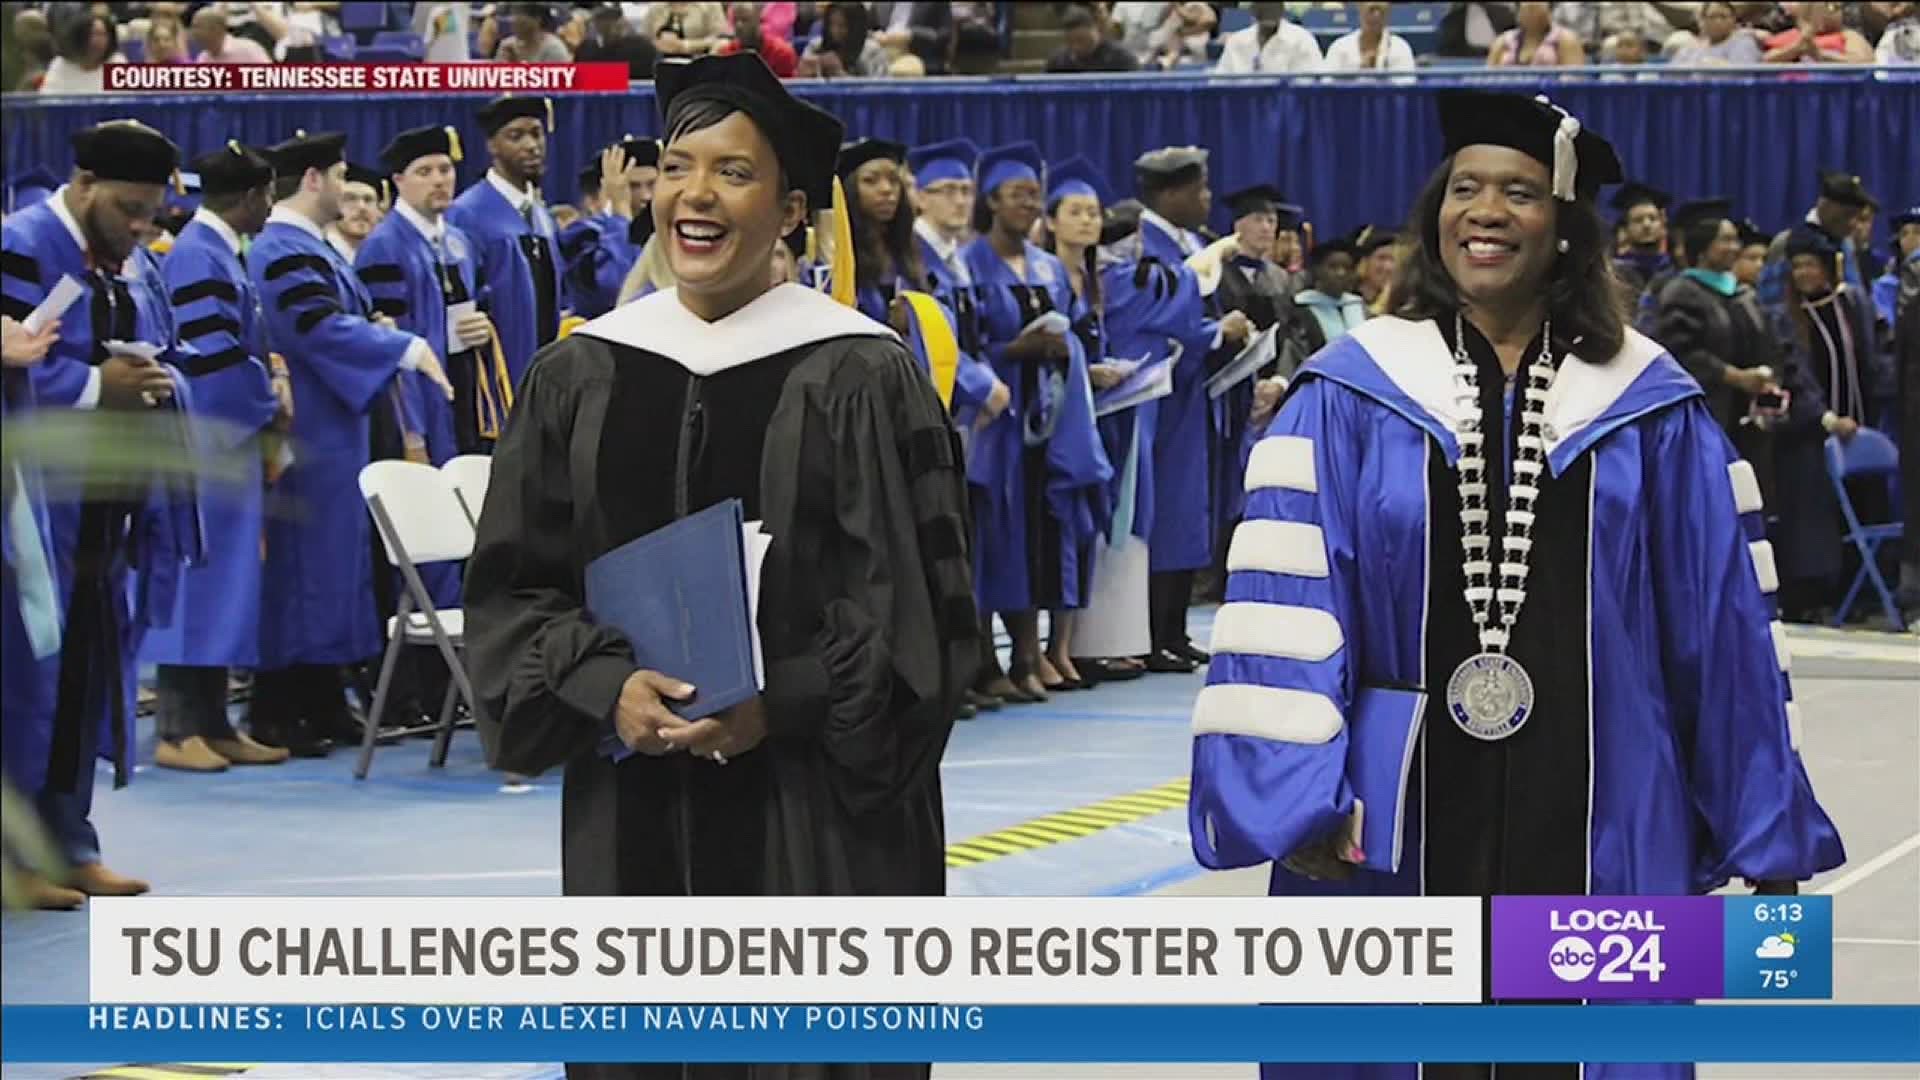 Tennessee State University voting challenge for students & HBCUs